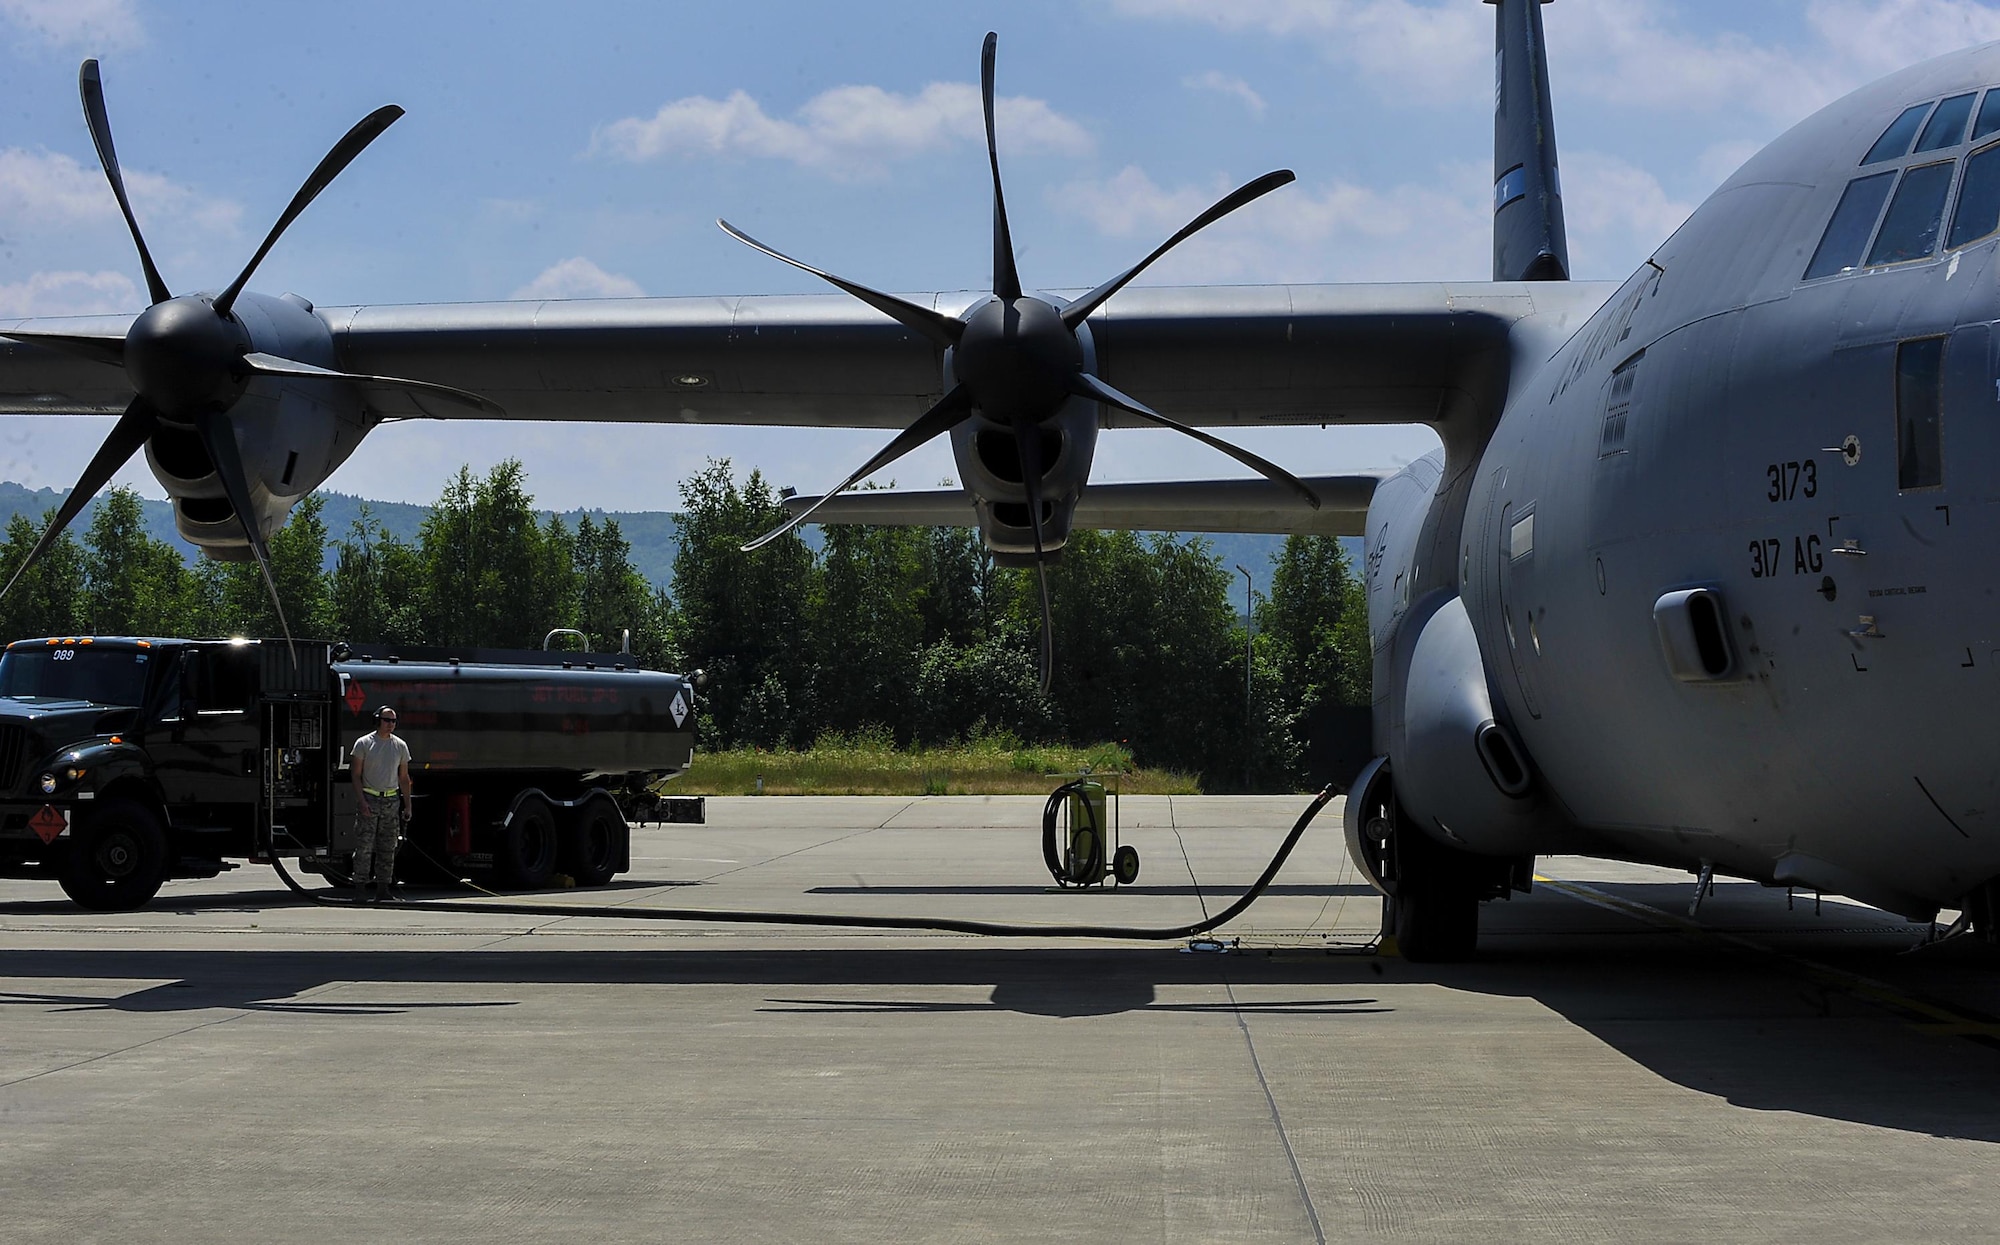 Airman 1st Class Zachary Hensley, 86th Logistics Readiness Squadron fuels operator, fuels a C-130J Super Hercules June 9, 2016, at Ramstein Air Base, Germany. Airmen from the 86th LRS provided support during Exercise Swift Response 2016 by continuously refueling aircraft to enable constant participation during the event. (U.S. Air Force photo/Senior Airman Larissa Greatwood) 